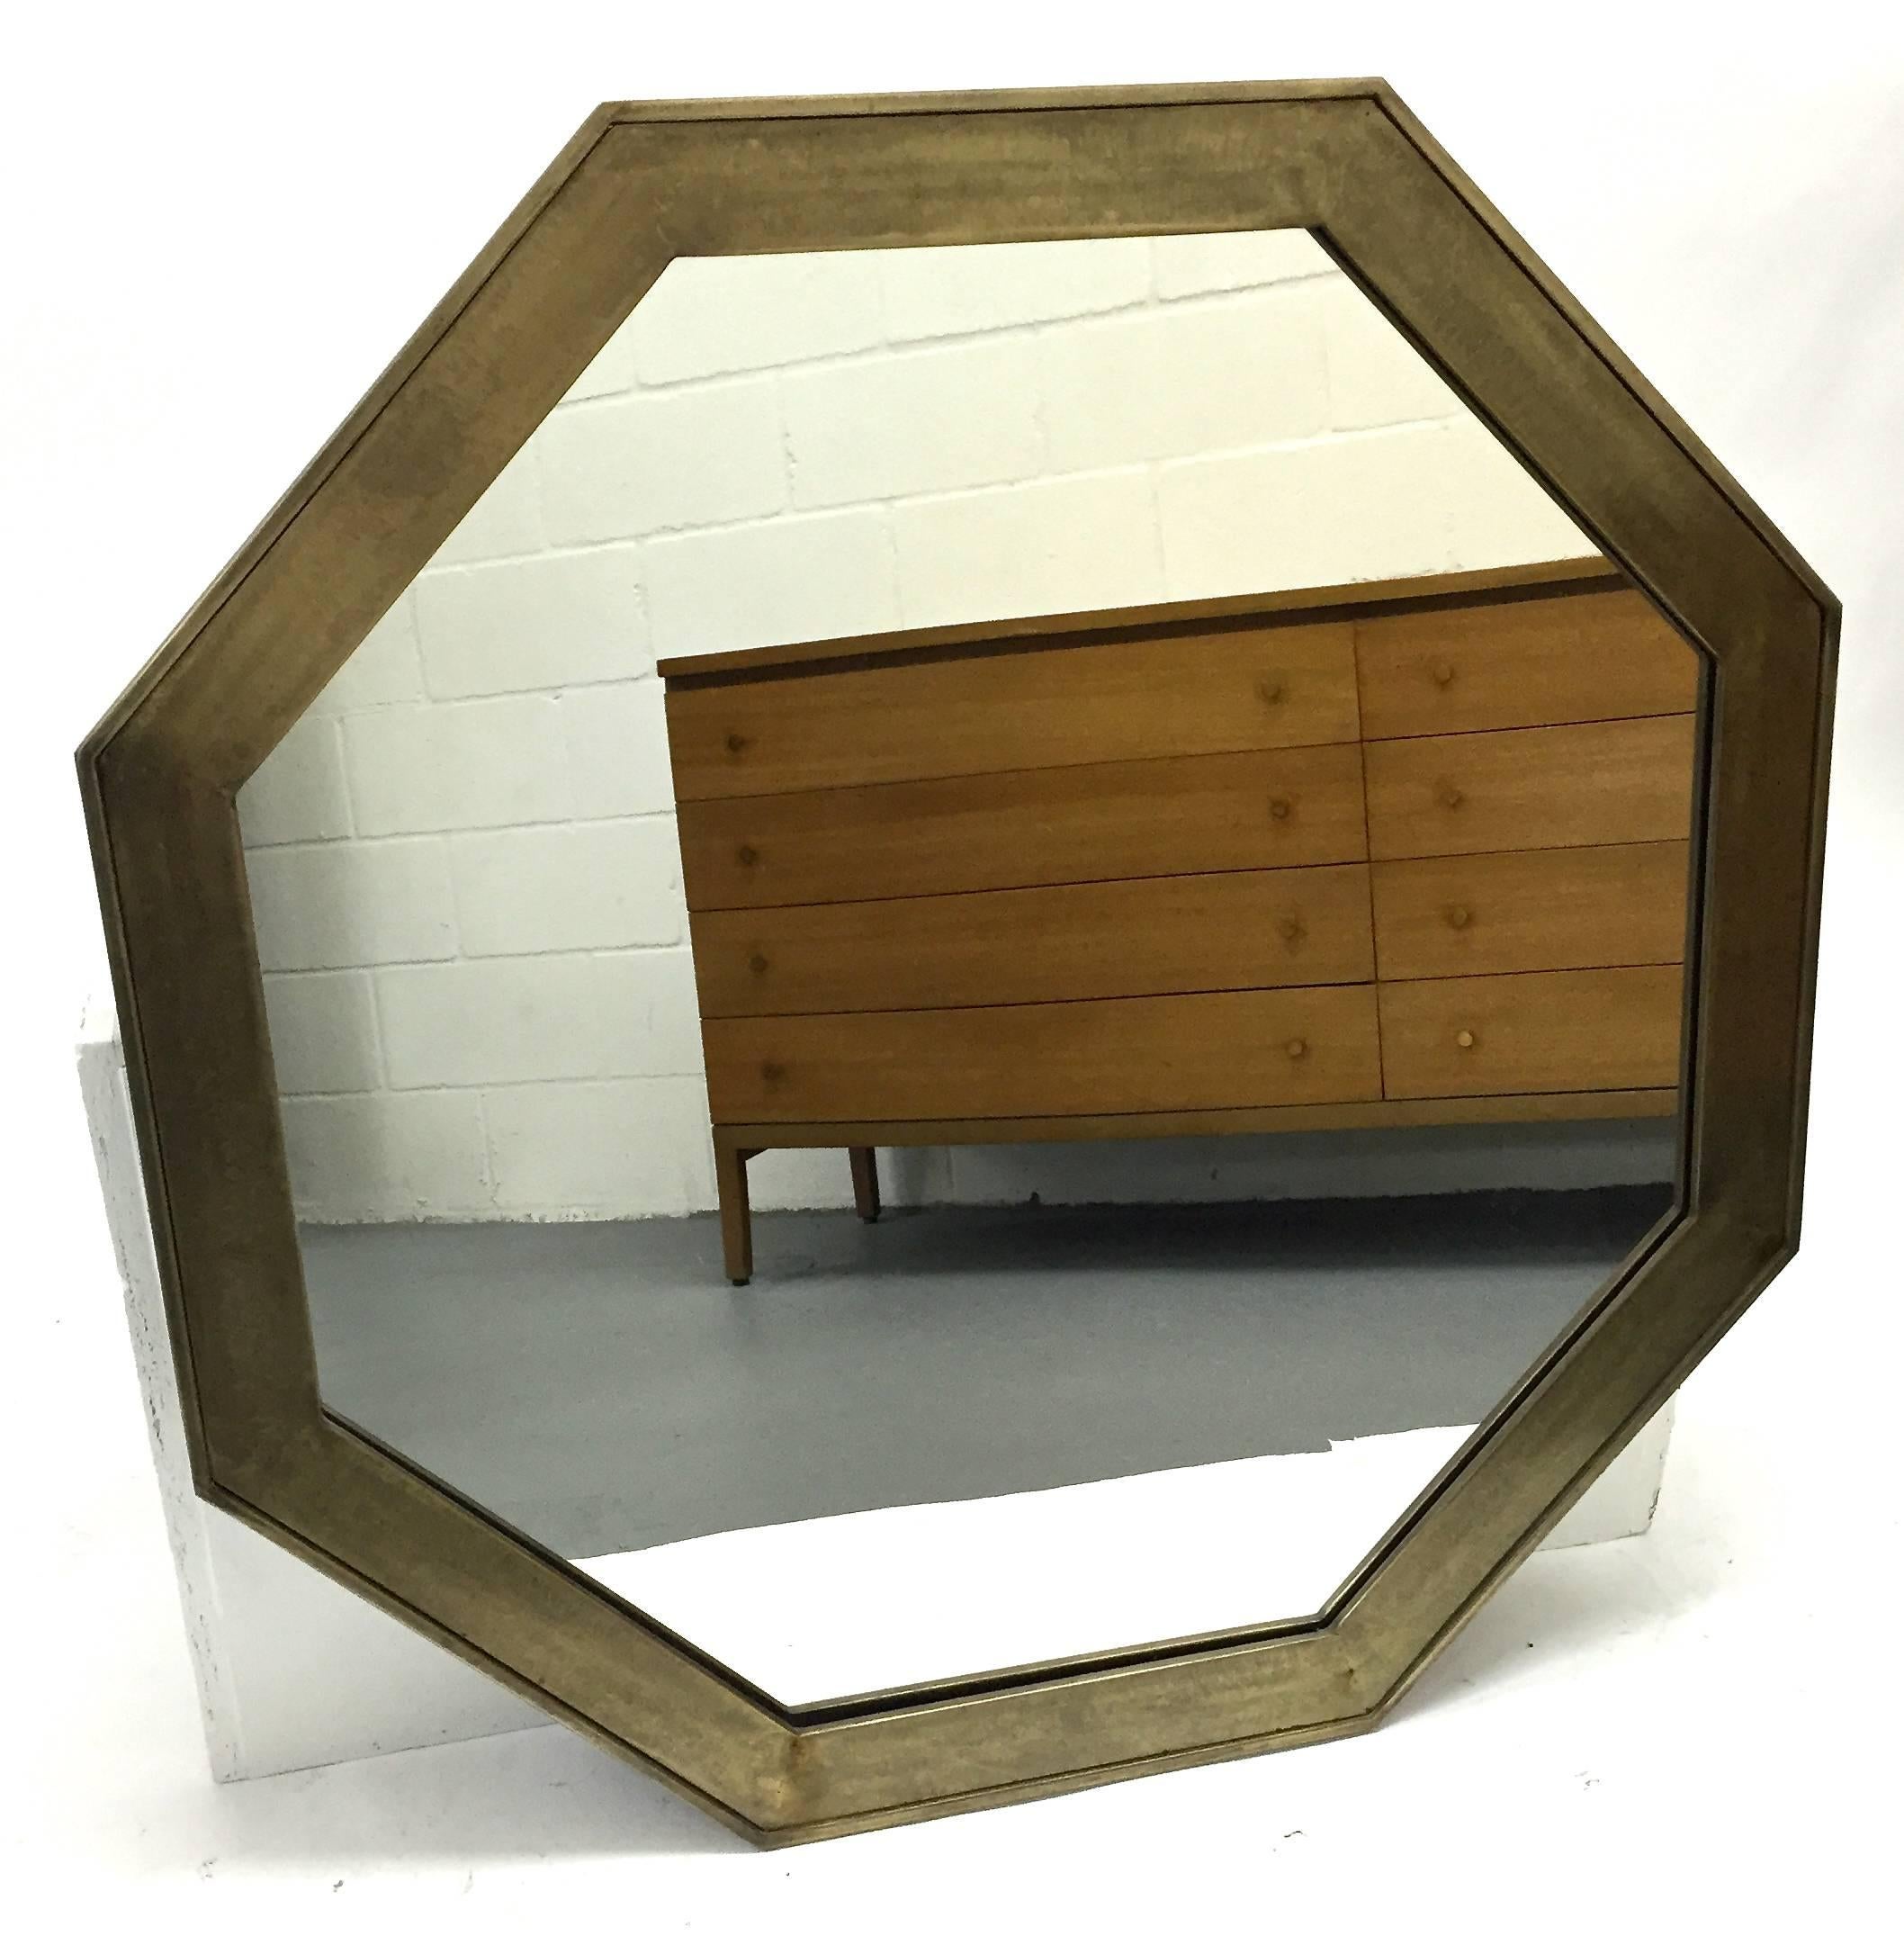 Brass octagonal wall mirror with a bronze patinated finish by John Widdicomb and retailed through John Stuart, Spain, 1960s.